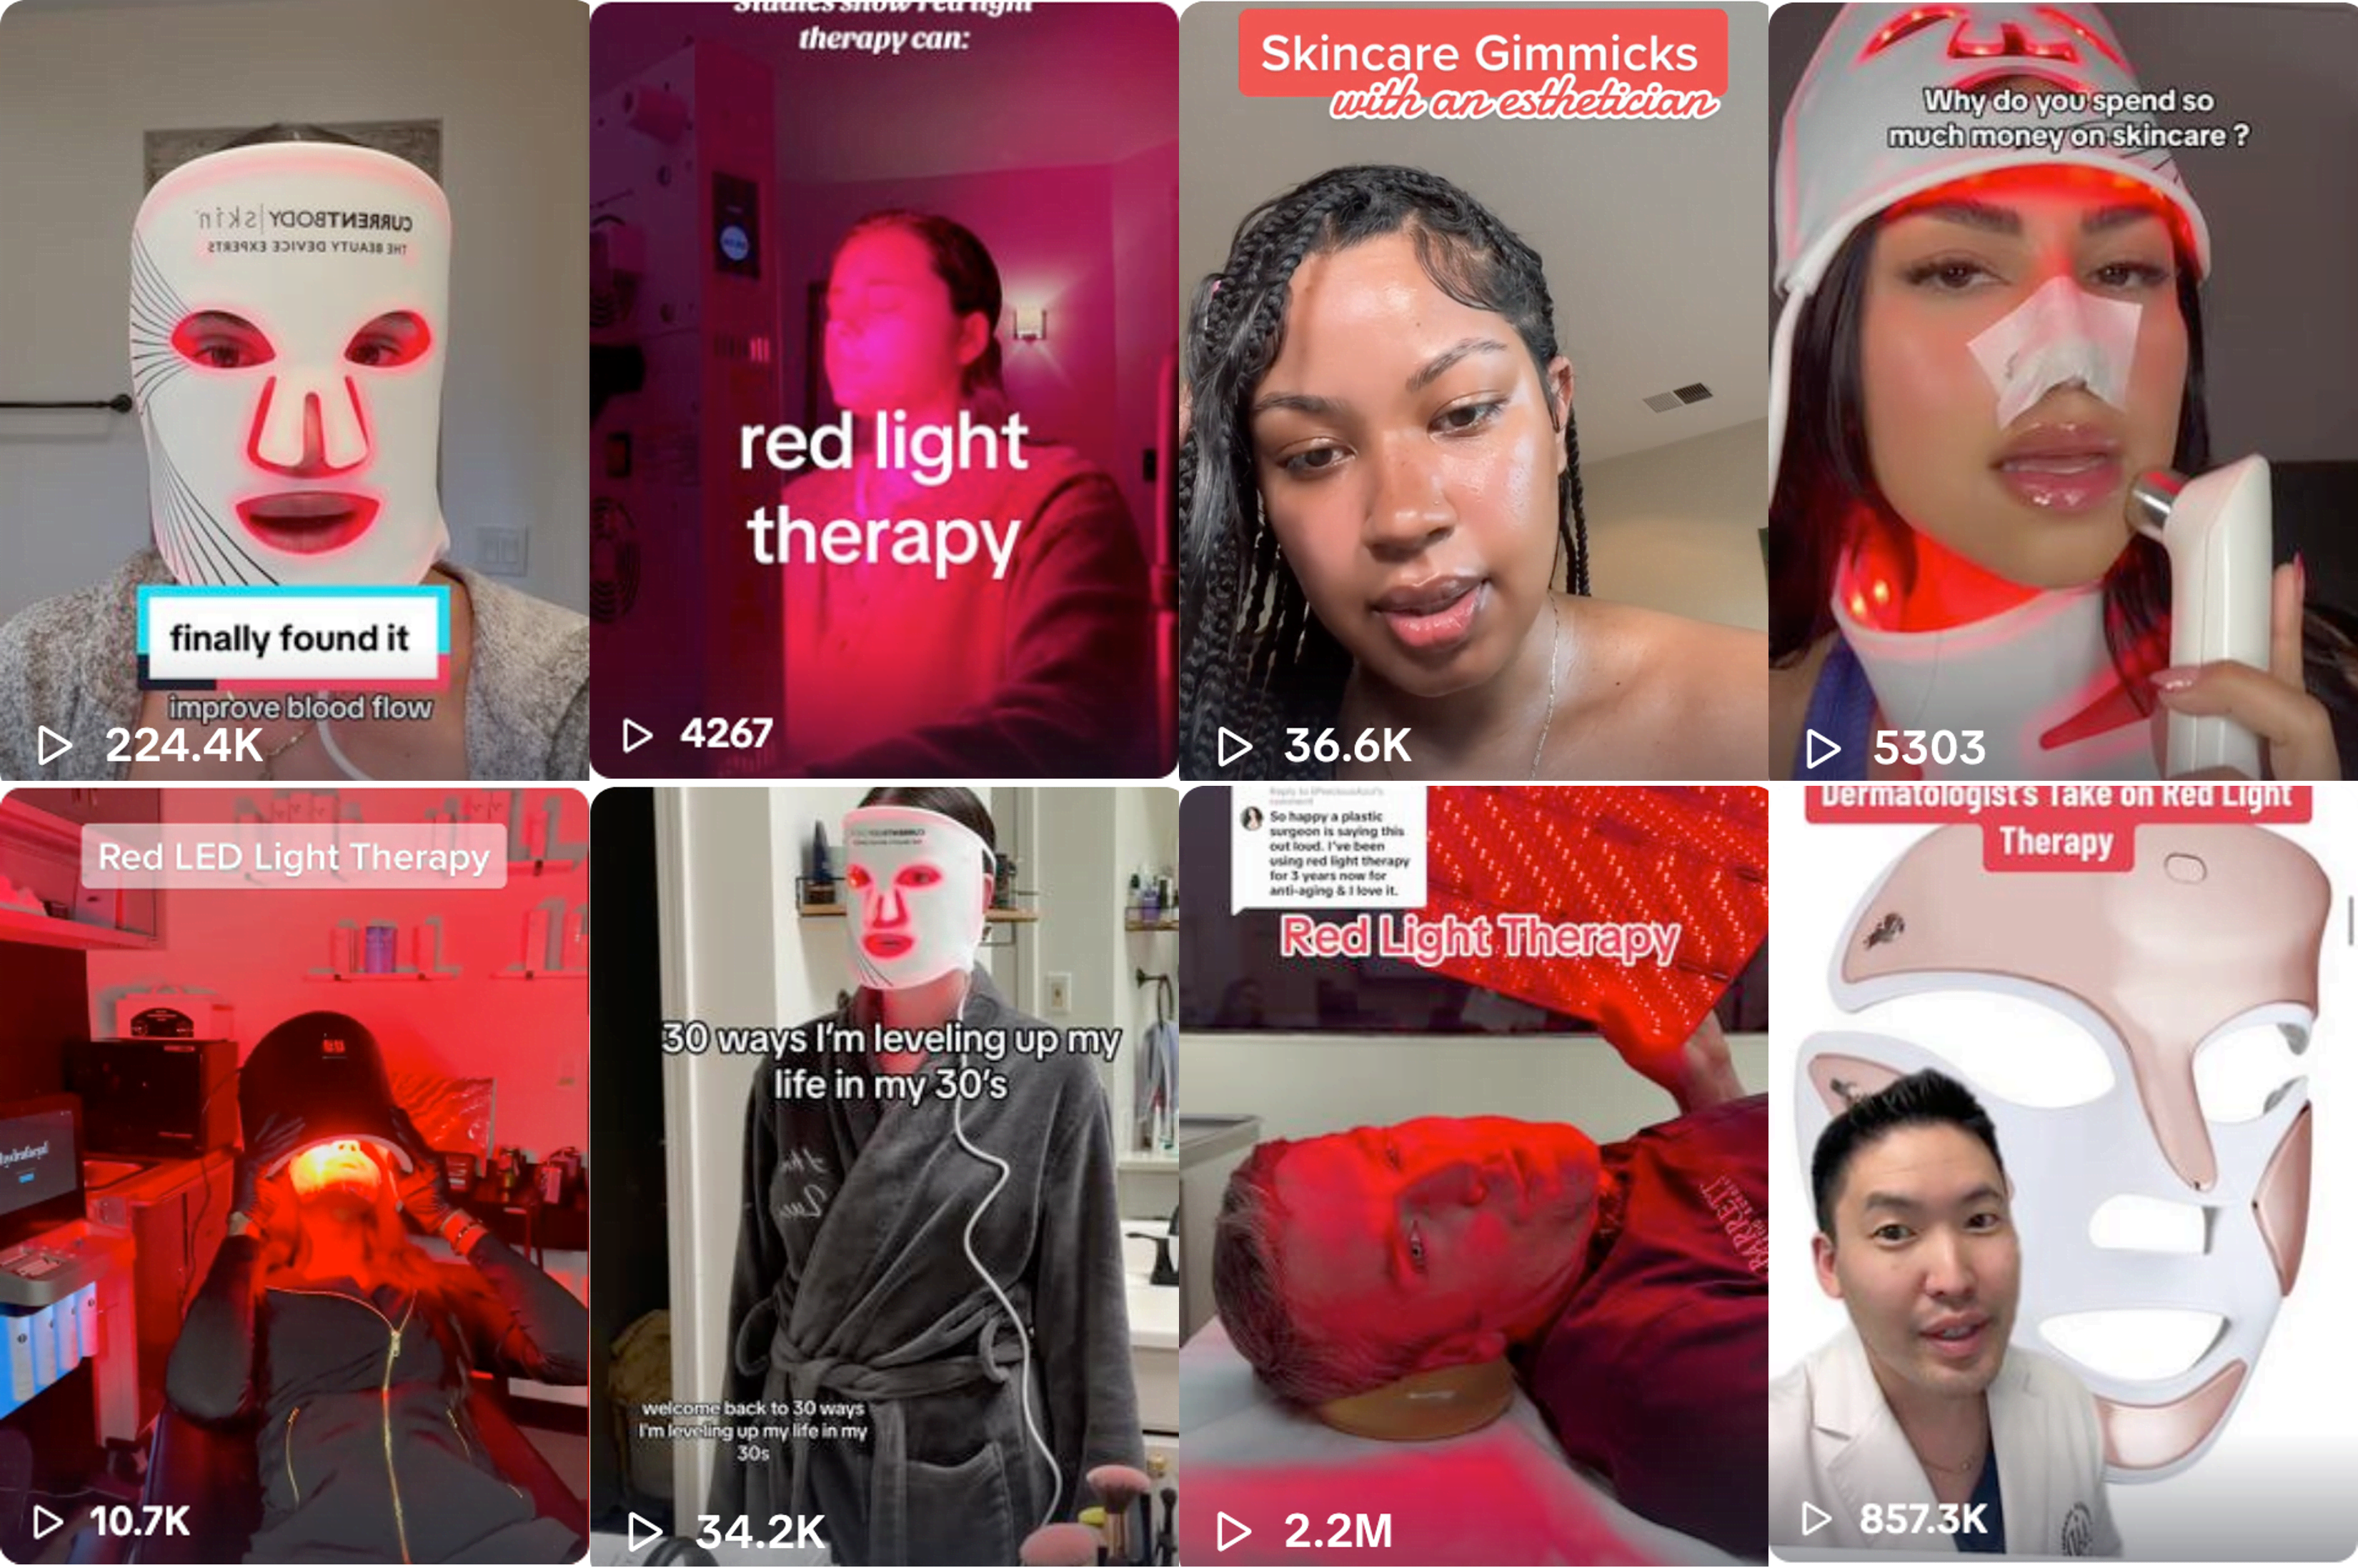 Red light therapy is trending on TikTok: Here's what to know